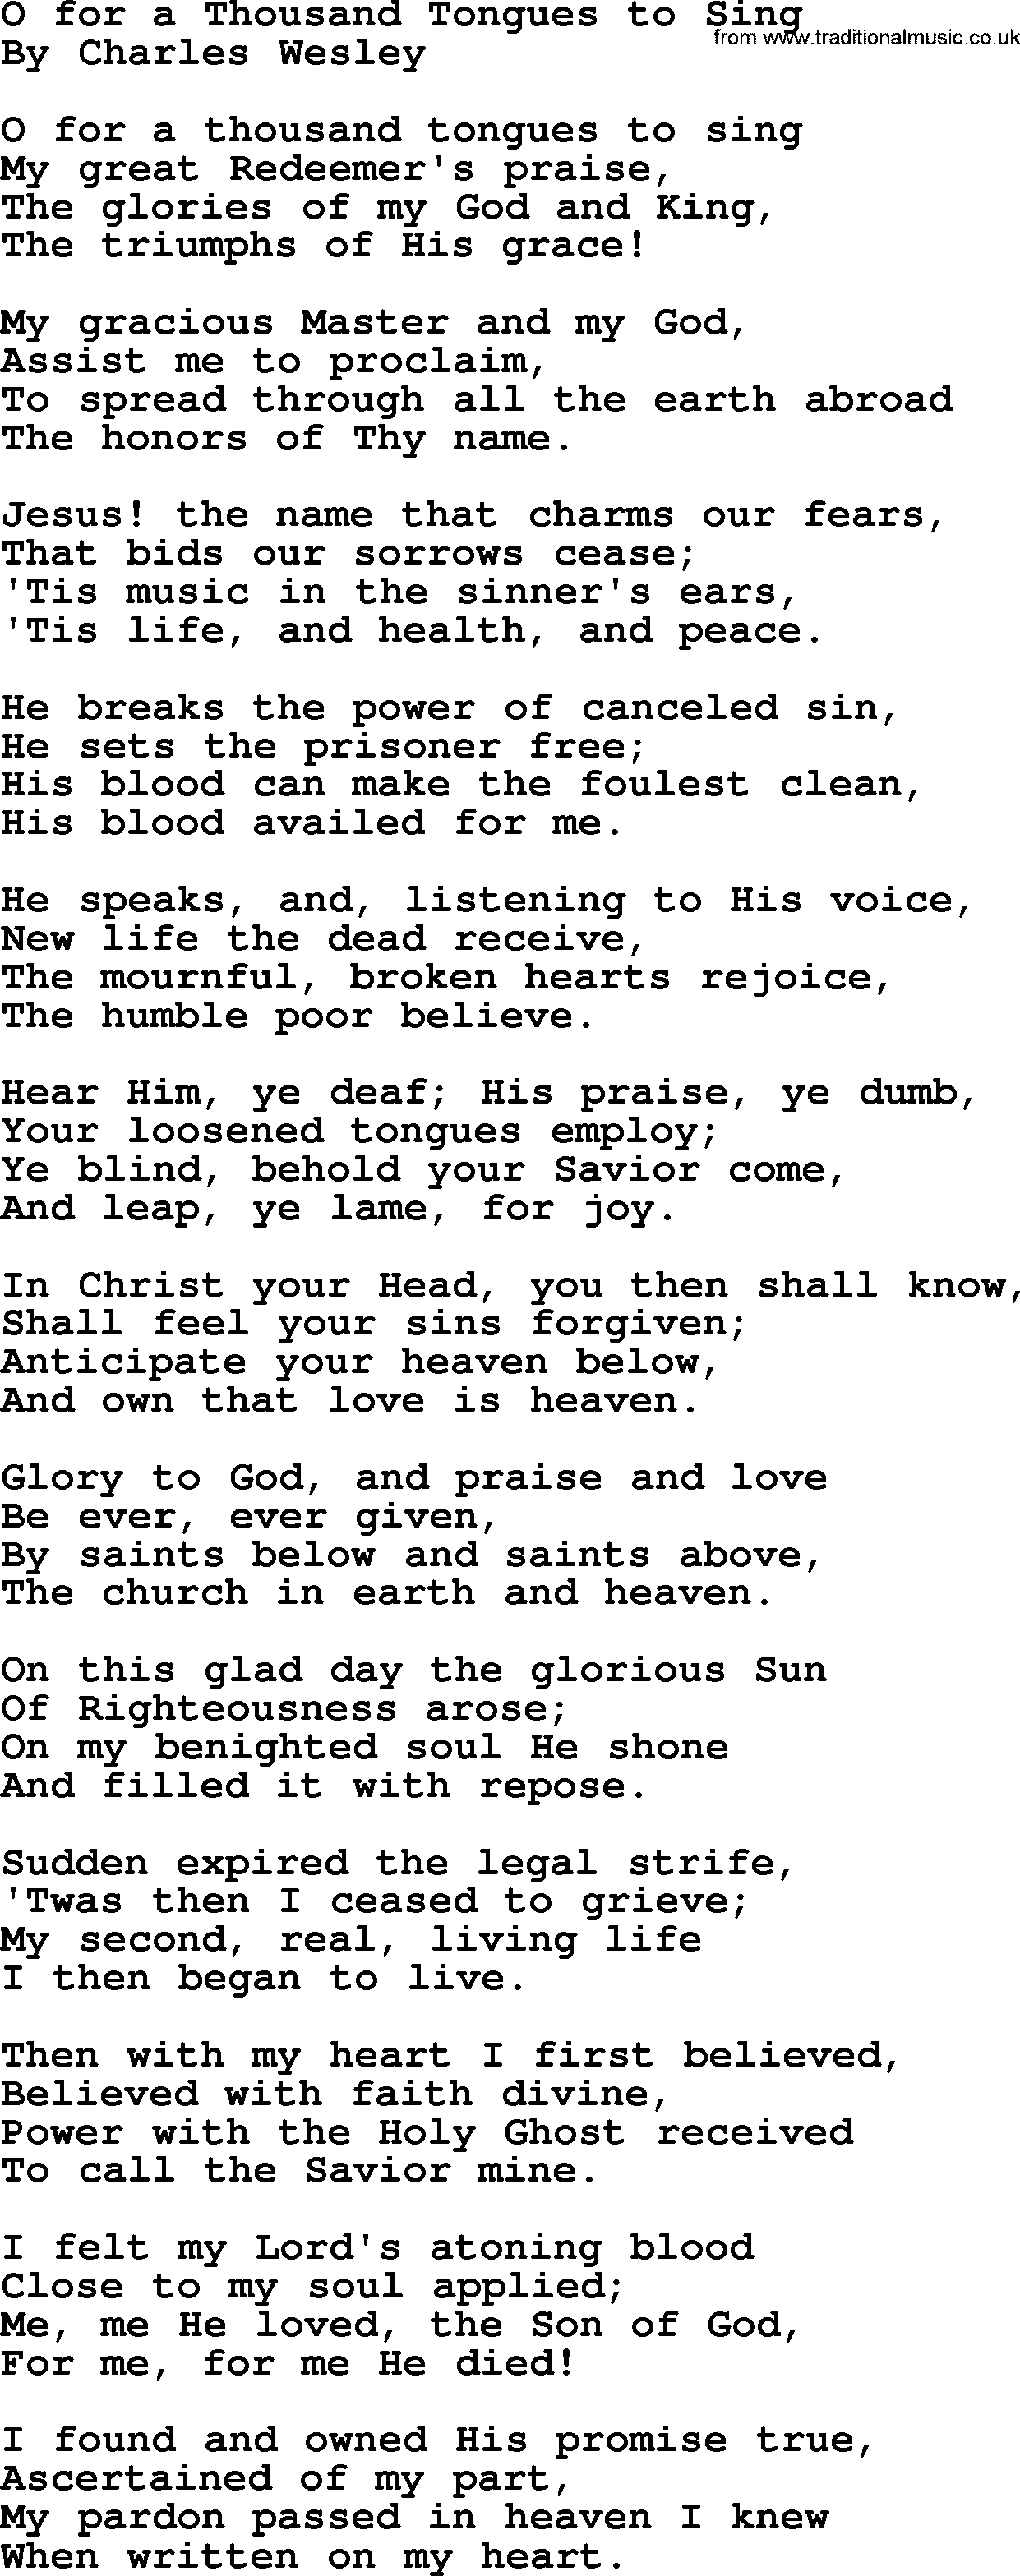 Charles Wesley hymn: O For A Thousand Tongues To Sing, lyrics